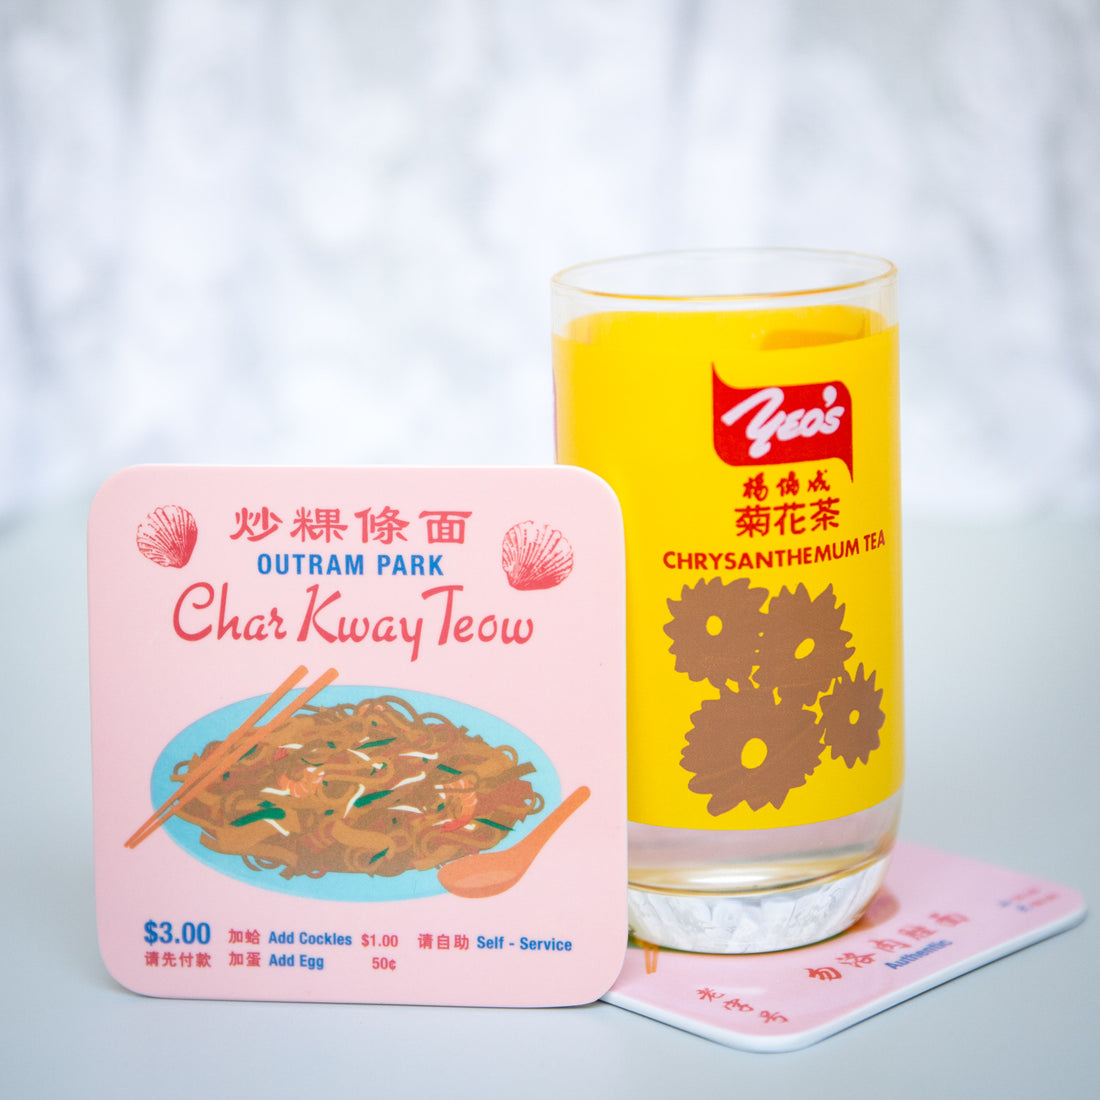 Outram Park Char Kway Teow Melamine Coaster